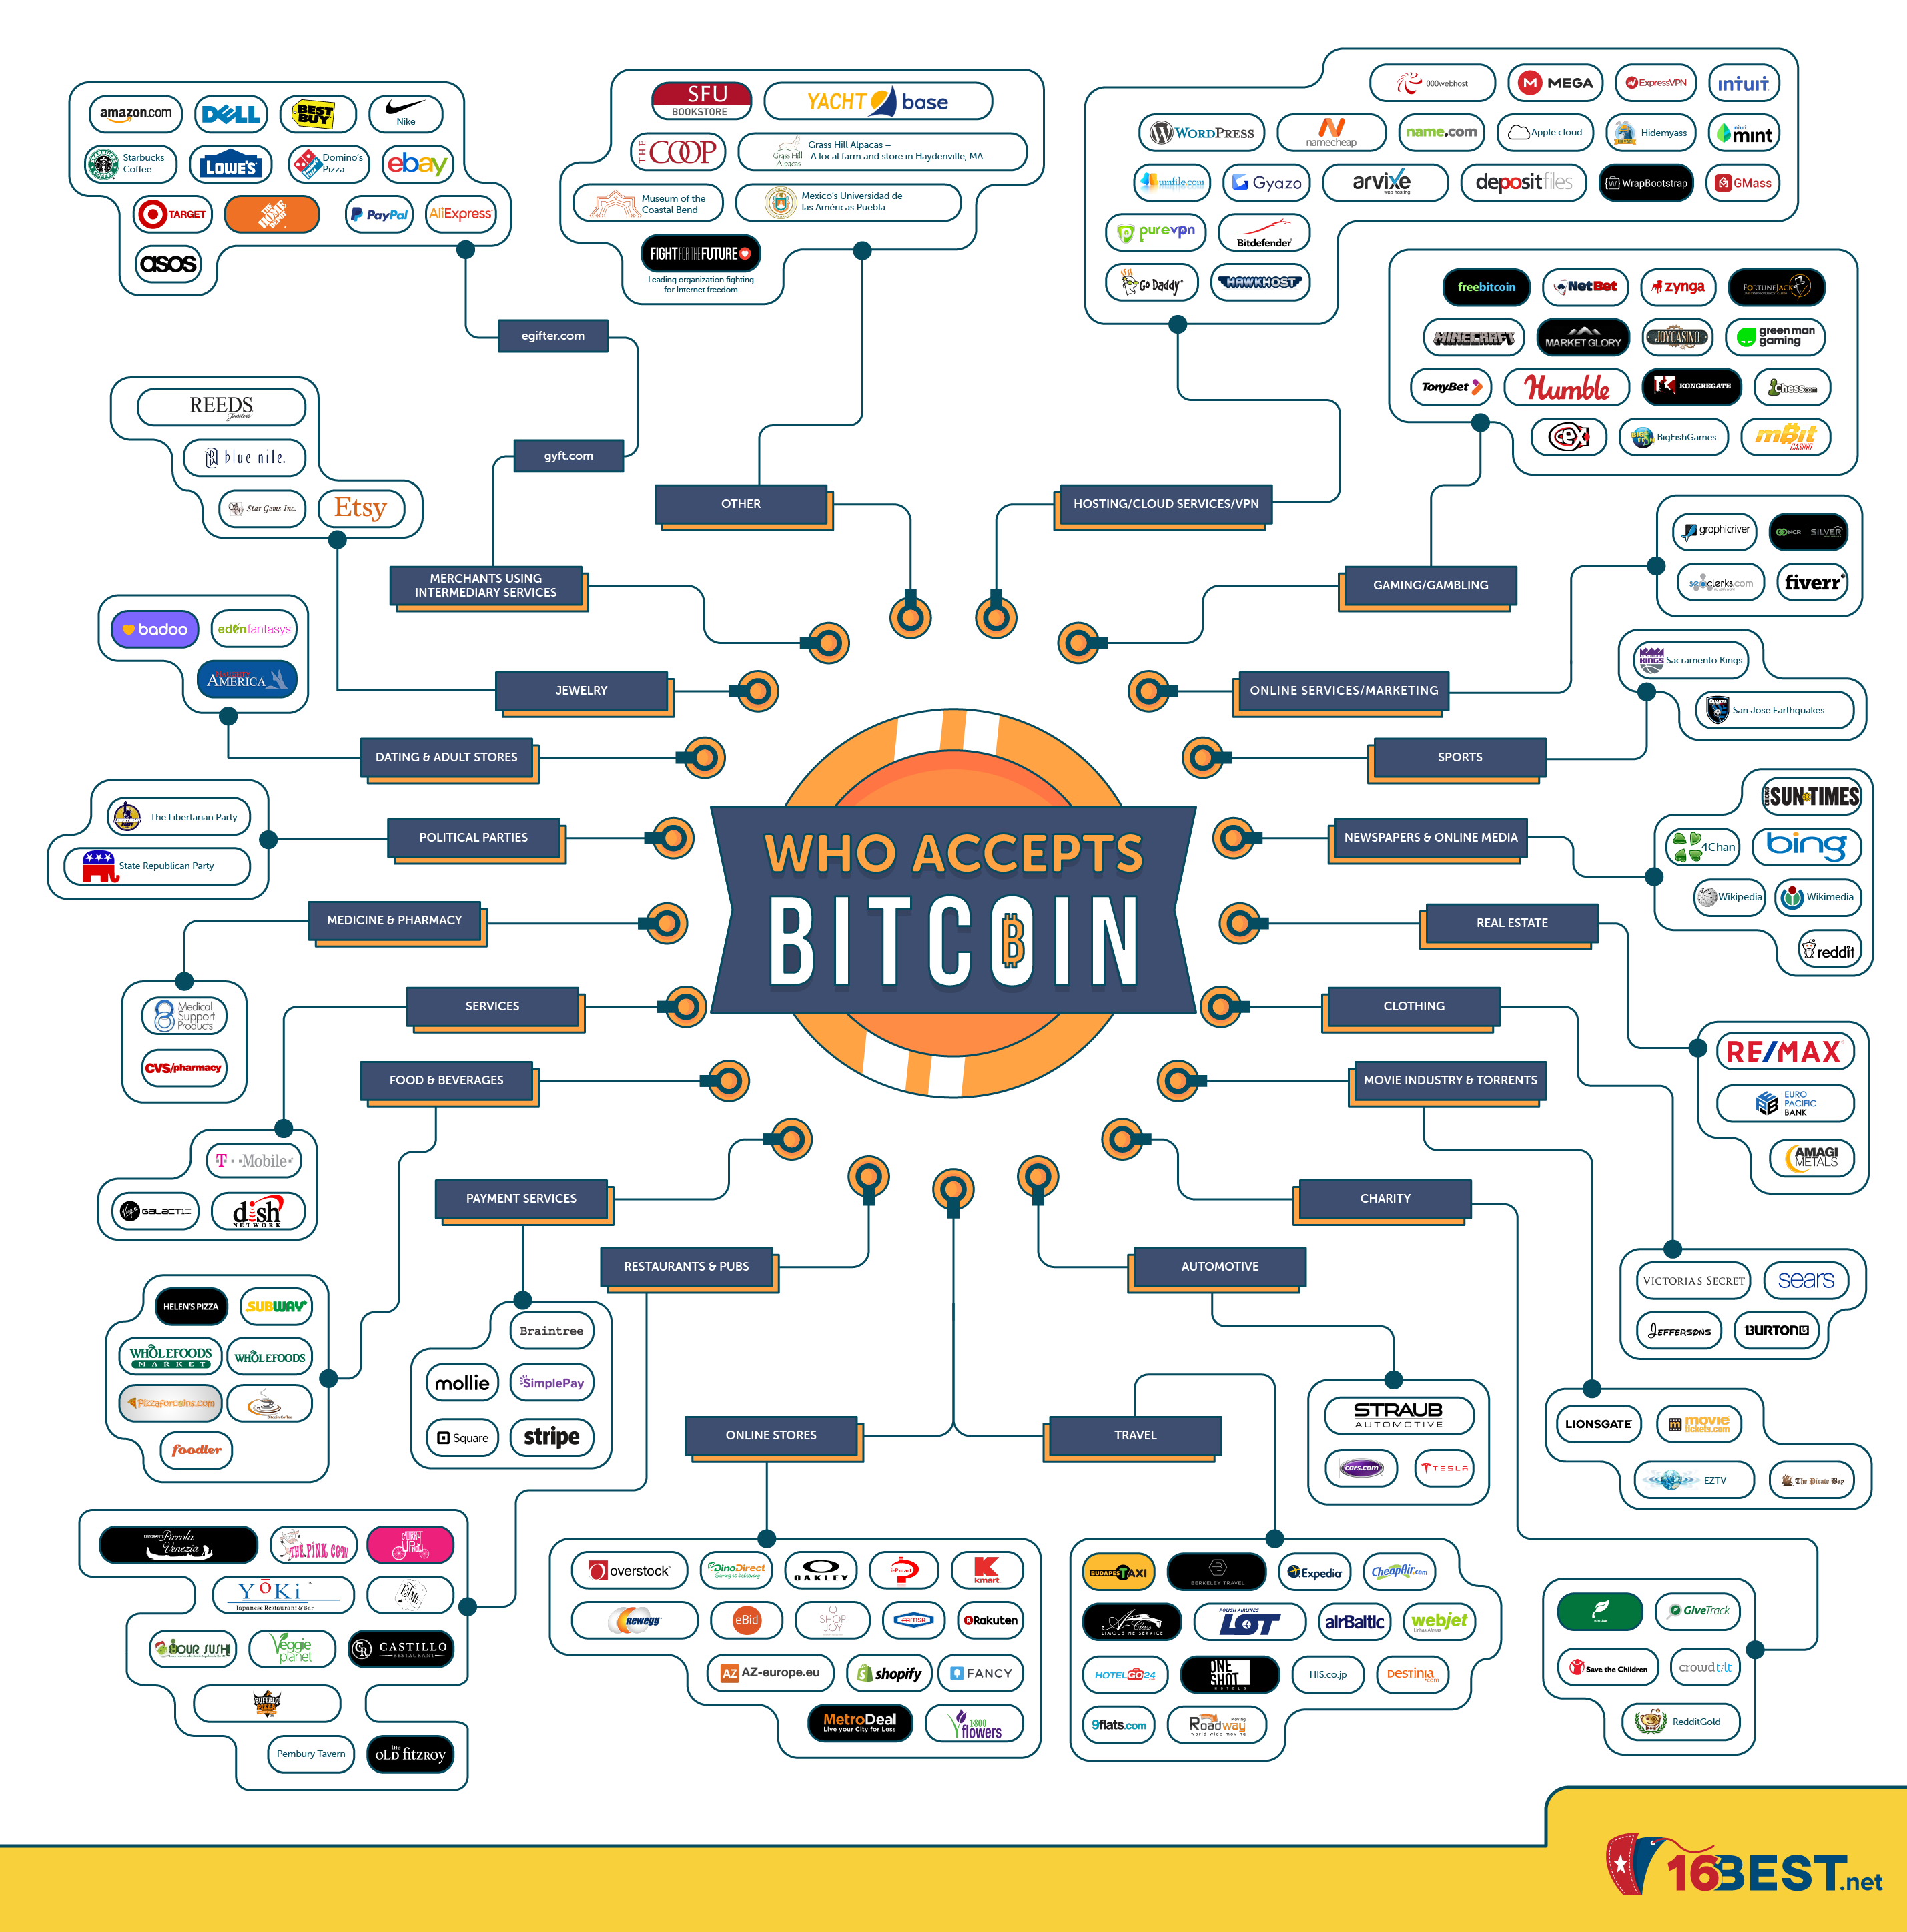 Everything you can buy with Bitcoin